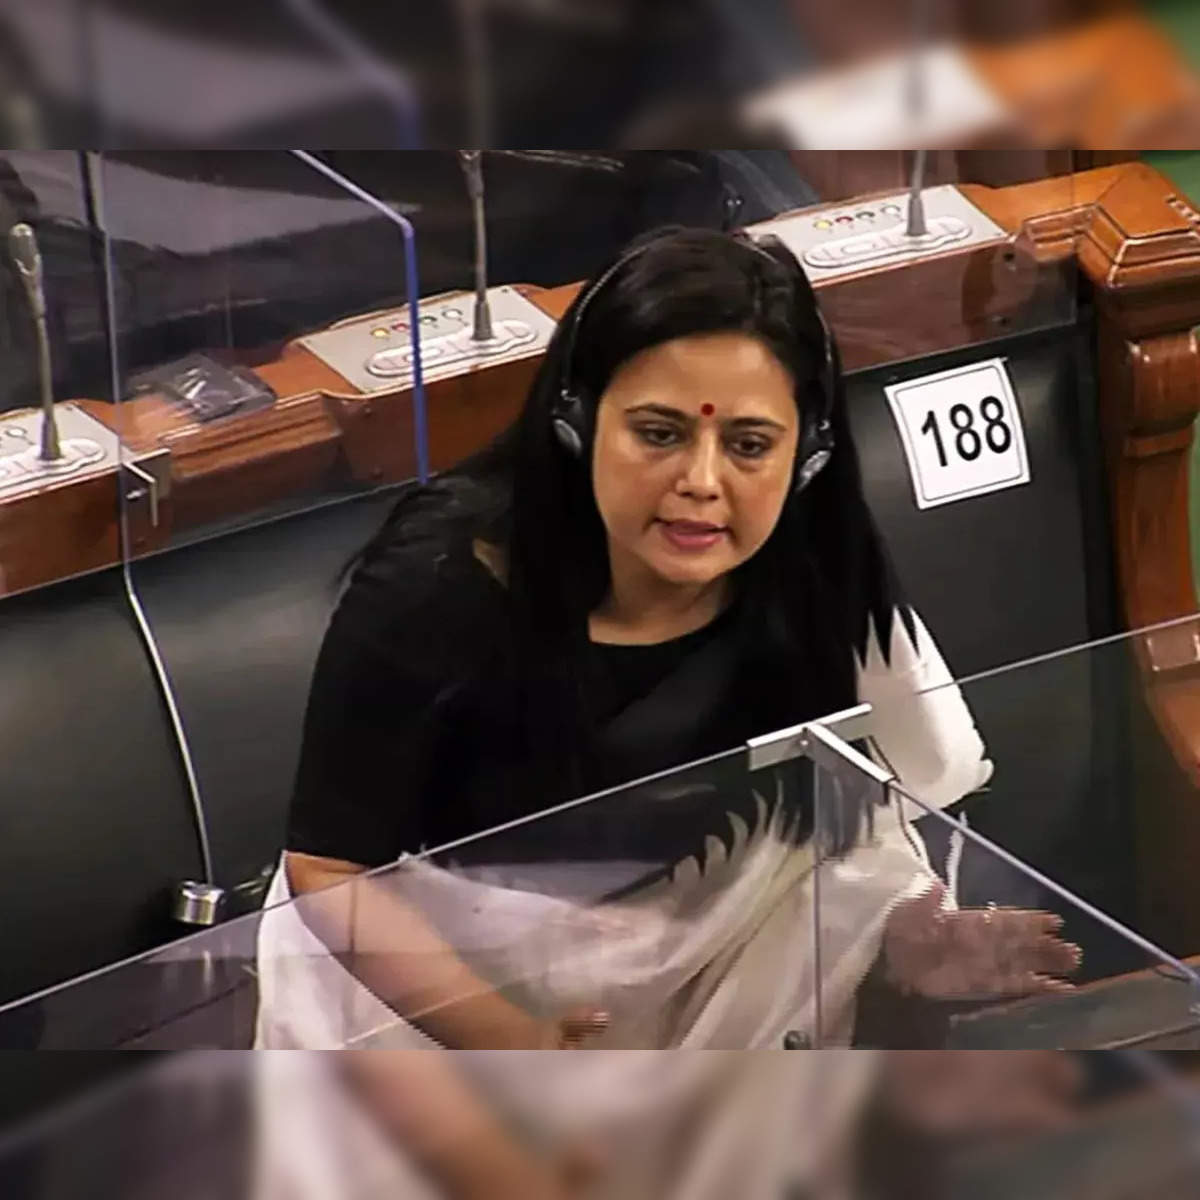 Mahua Moitra News, Cash For Query Scam, Mahua Moitra To Appear Before  Ethics Panel Today